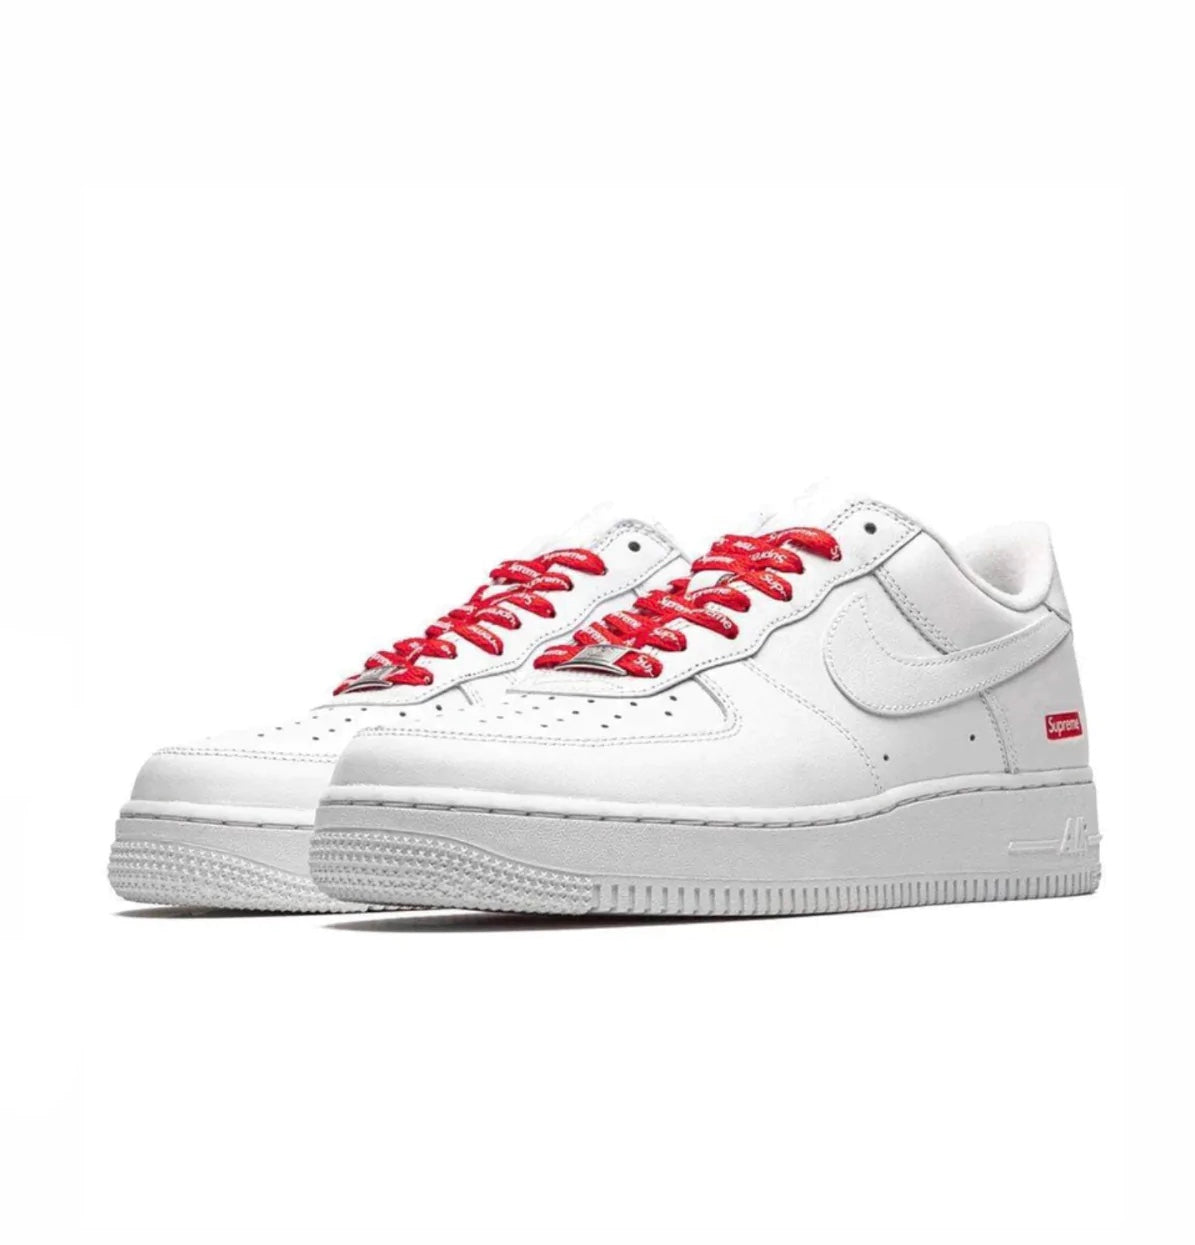 Nike Air Force 1 07’ – White ‘Supreme’ Limited Edition